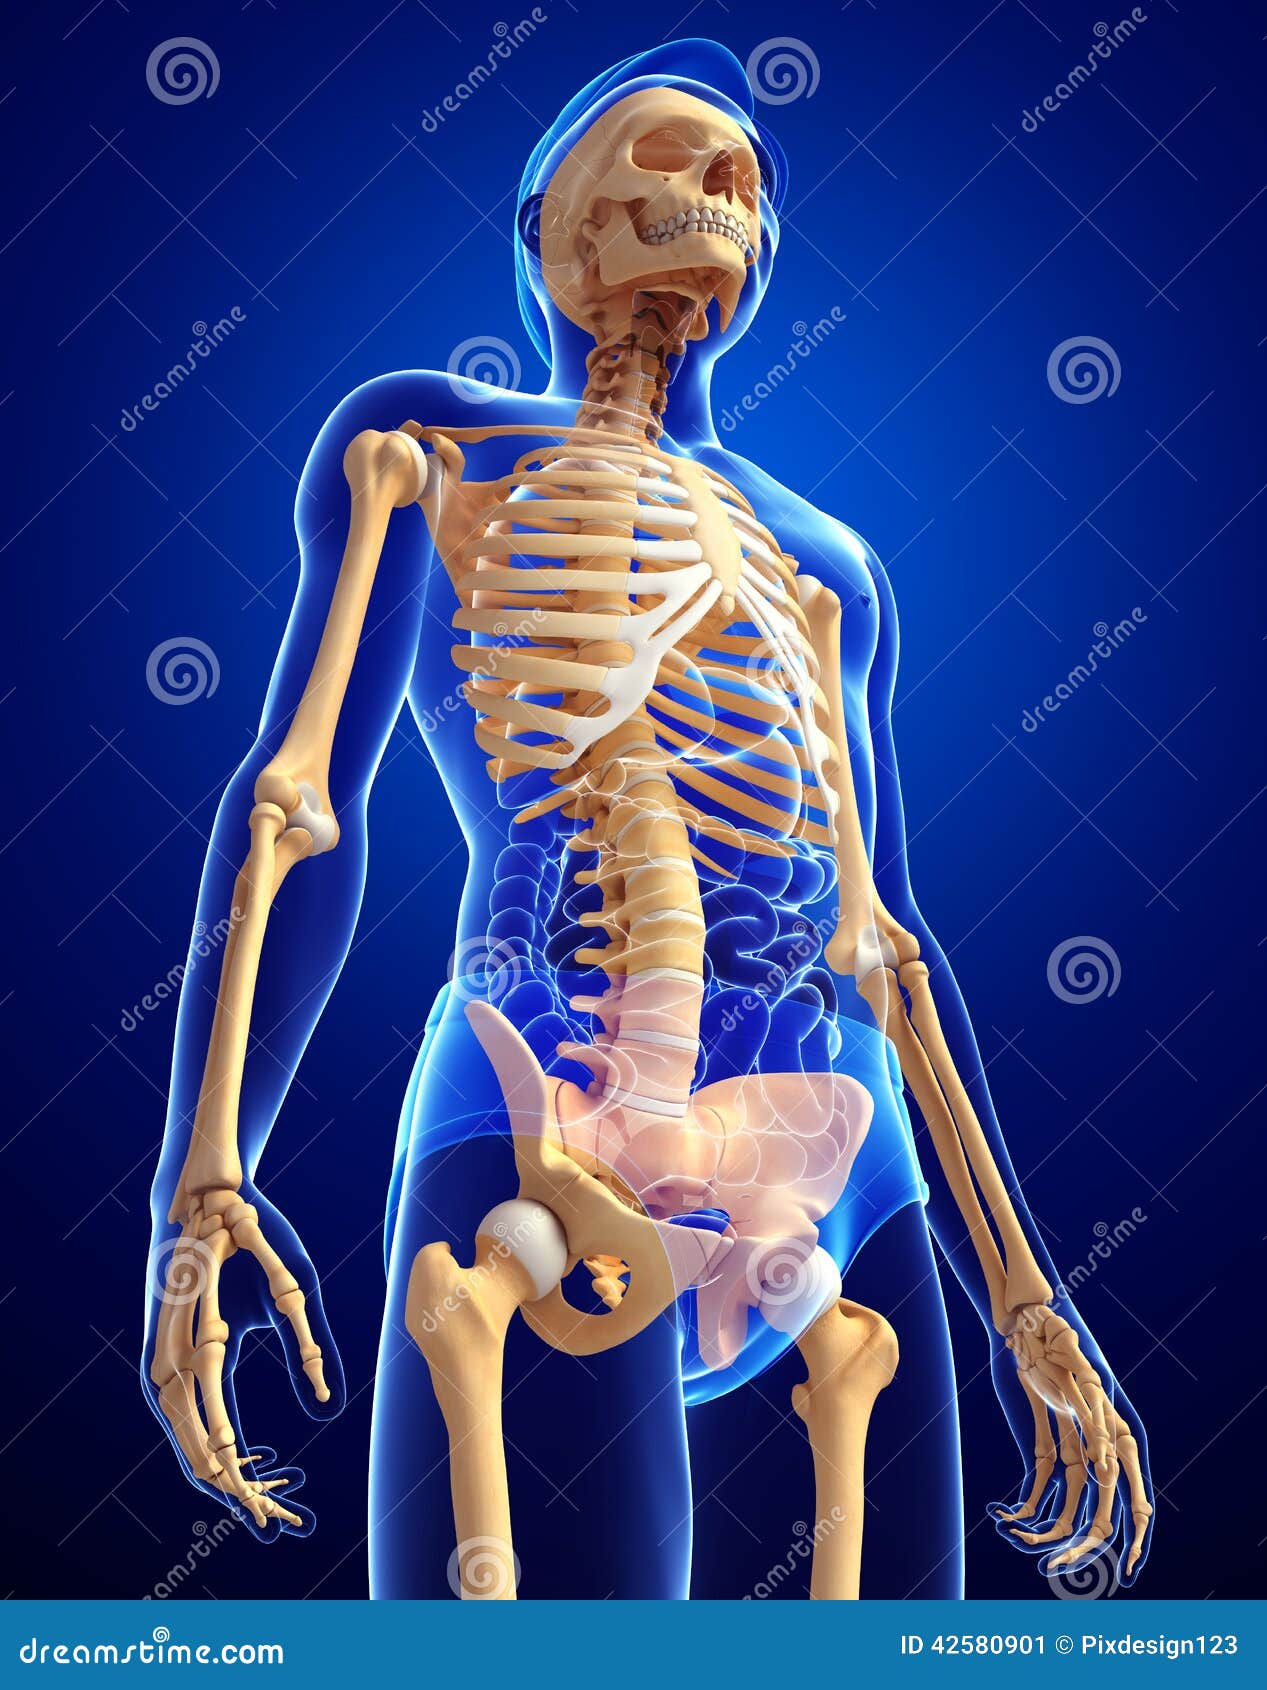 which are considered part of anatomic dead space